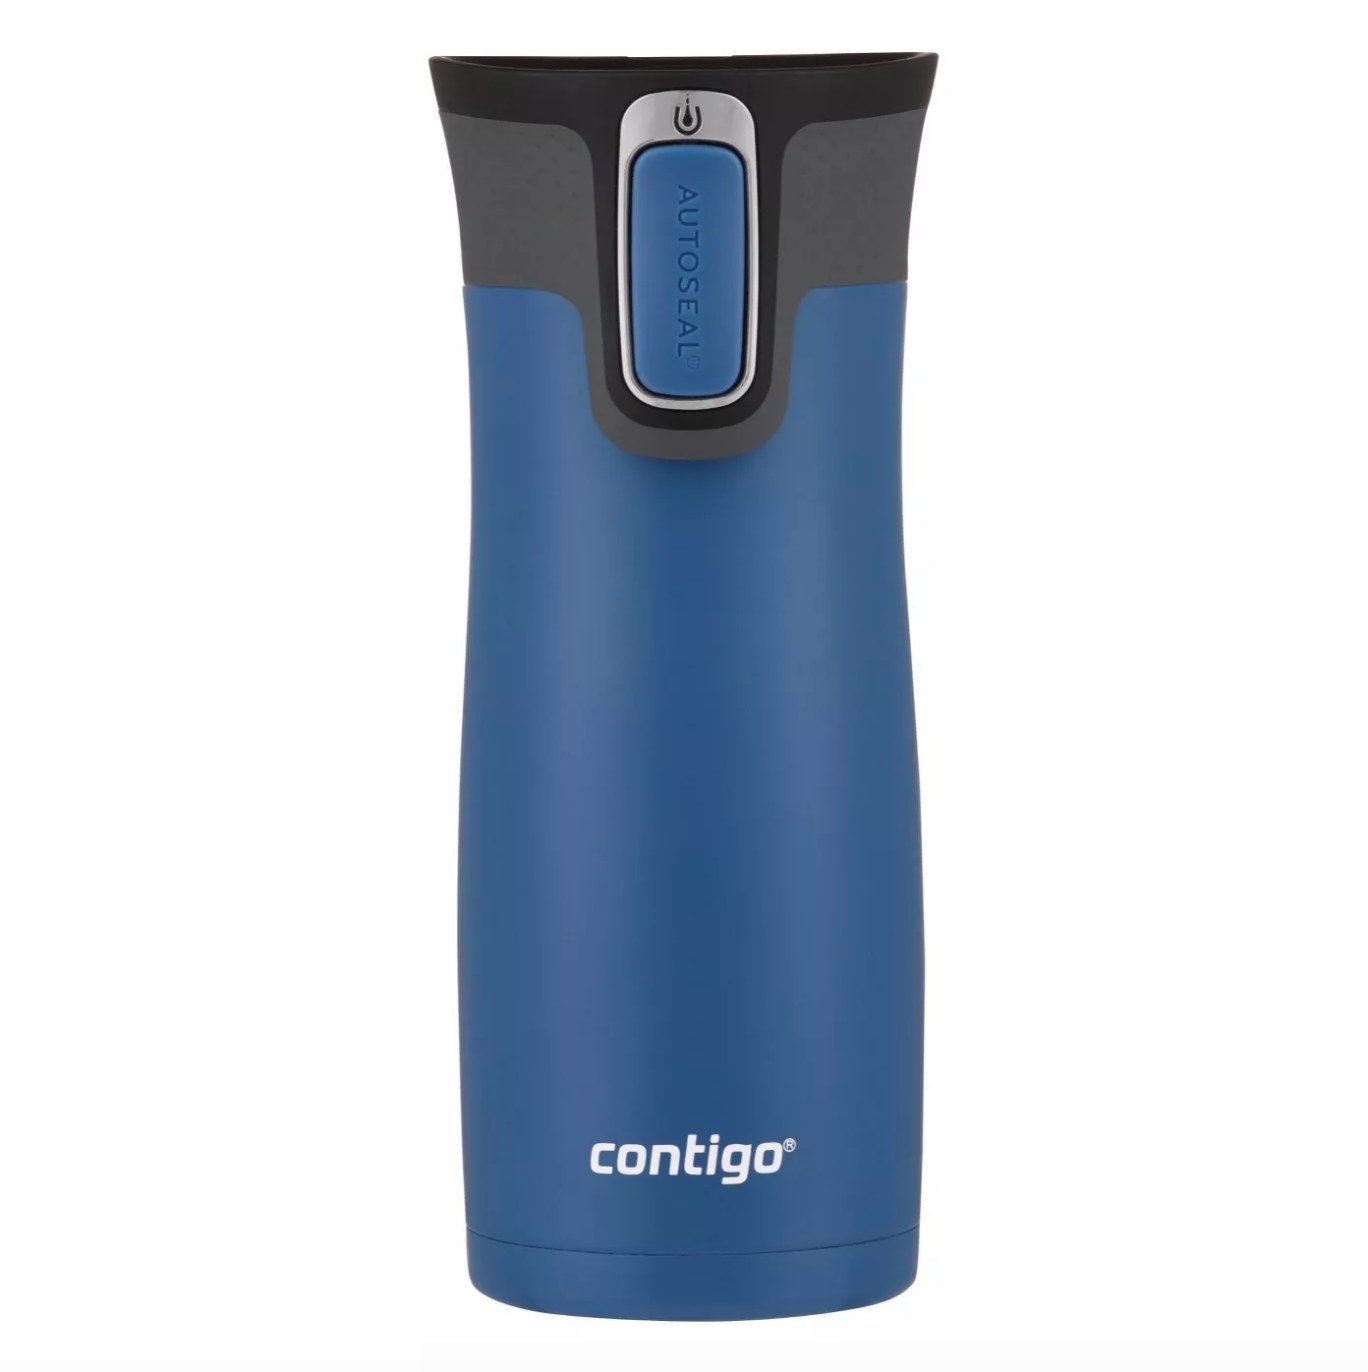 The stainless steel travel mug in blue